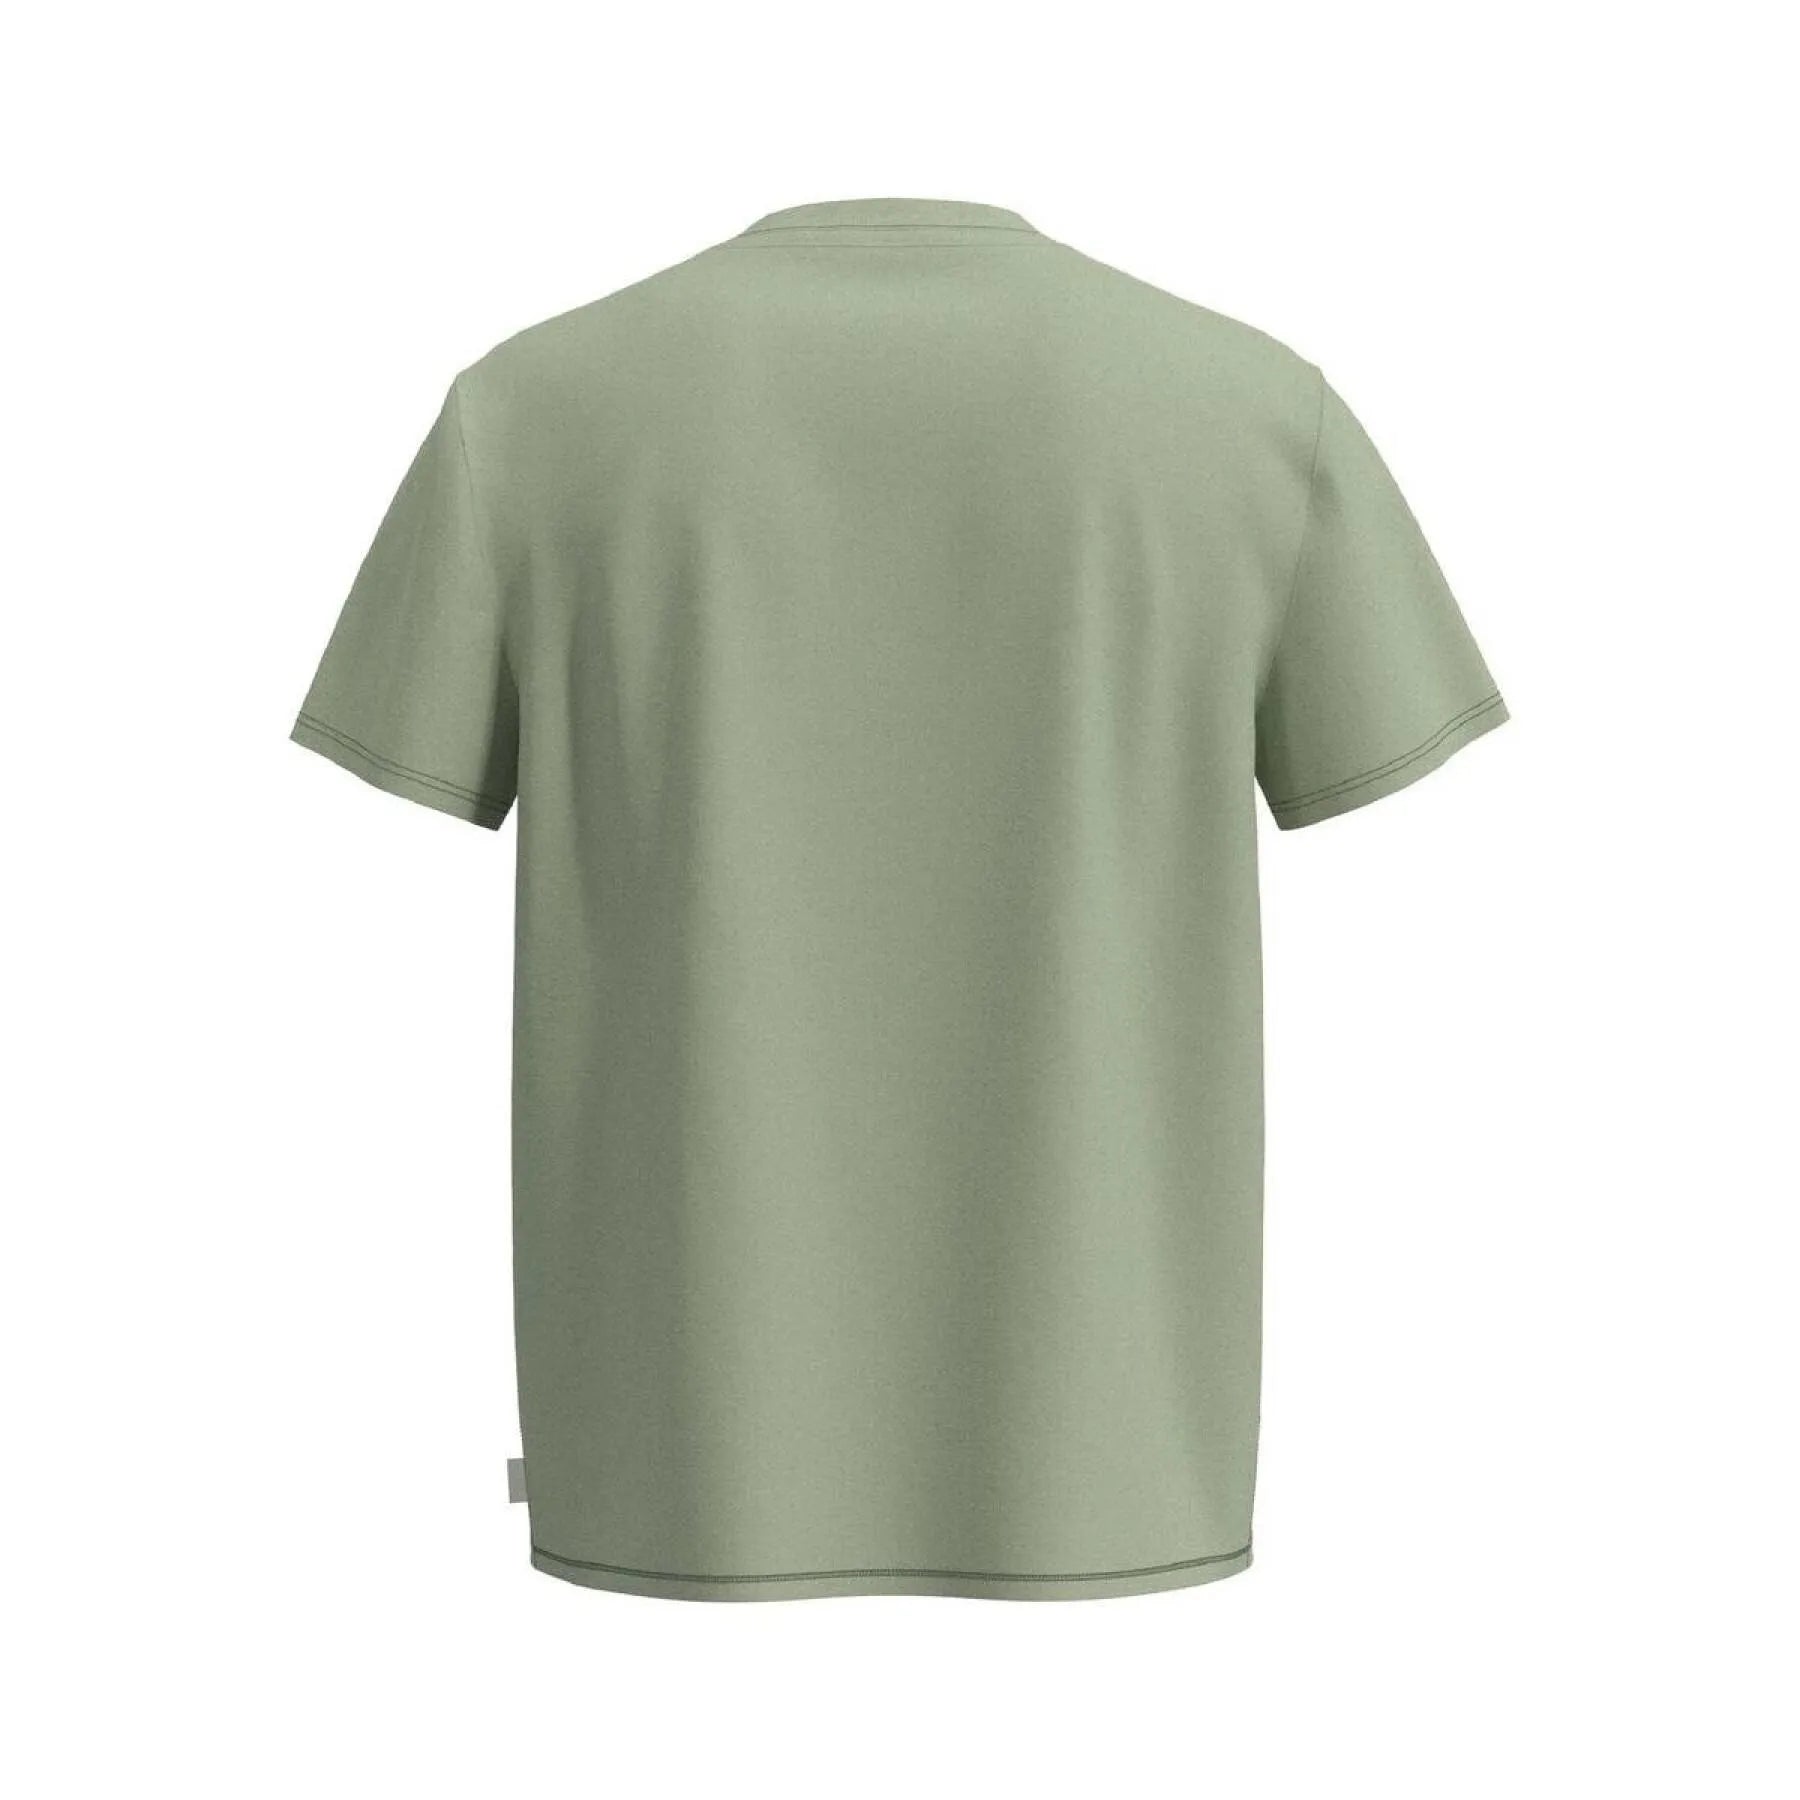 Pepe Jeans Ovingdean T-Shirt: Effortless style meets comfort in this classic men's t-shirt (PM508977).Soft & Versatile: Crafted for everyday wear, this Pepe Jeans t-shirt is your go-to for minimalist style